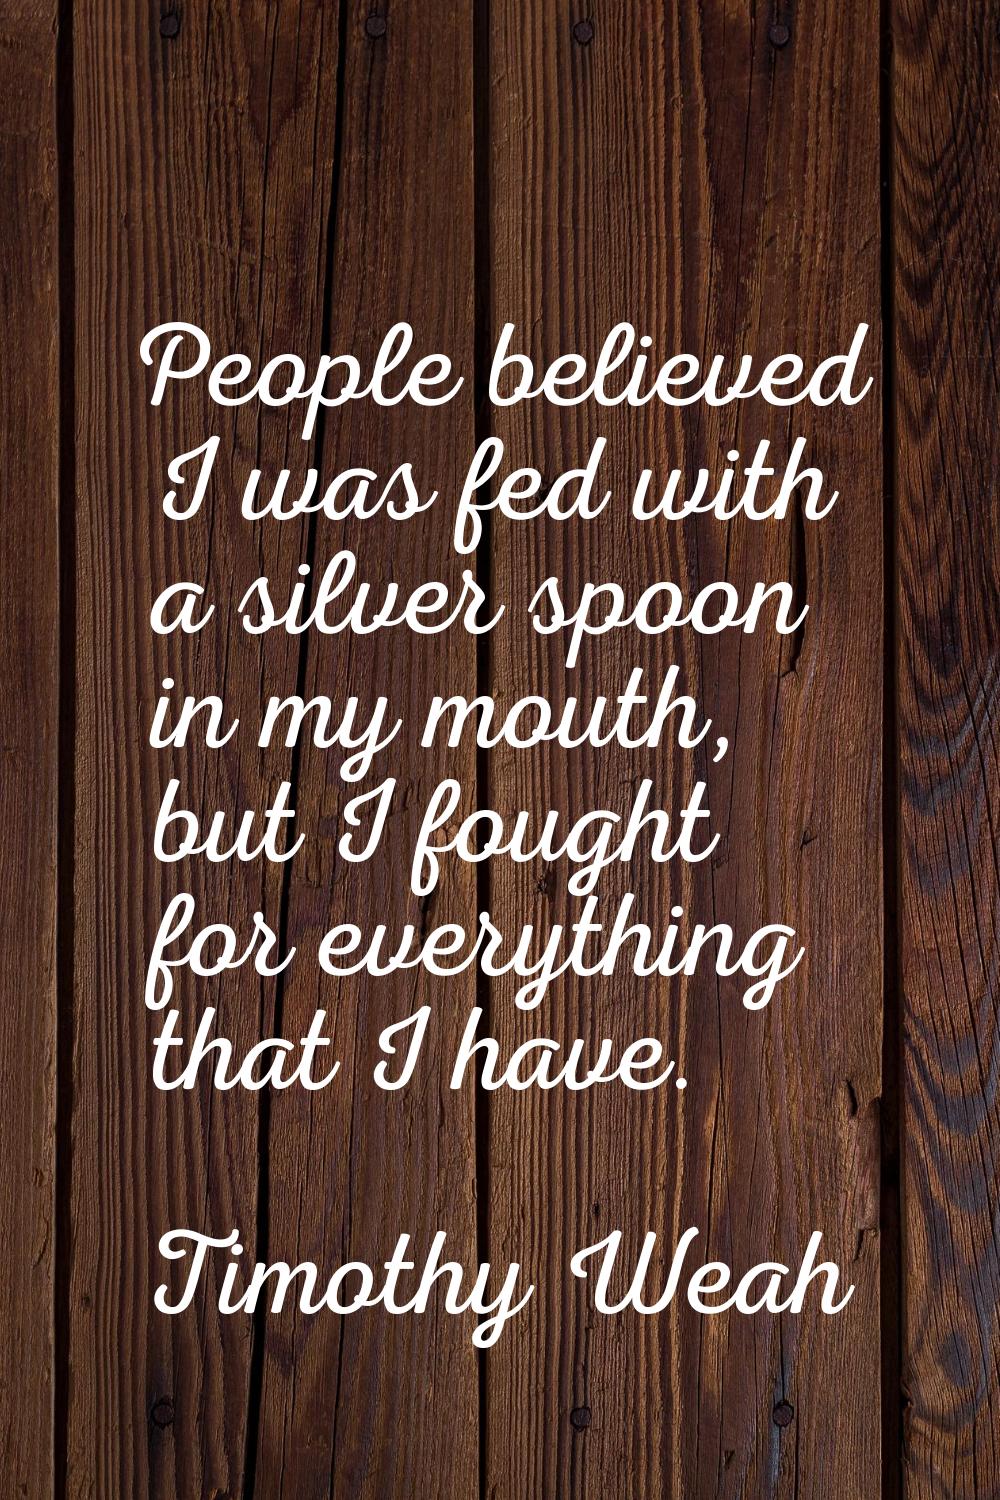 People believed I was fed with a silver spoon in my mouth, but I fought for everything that I have.